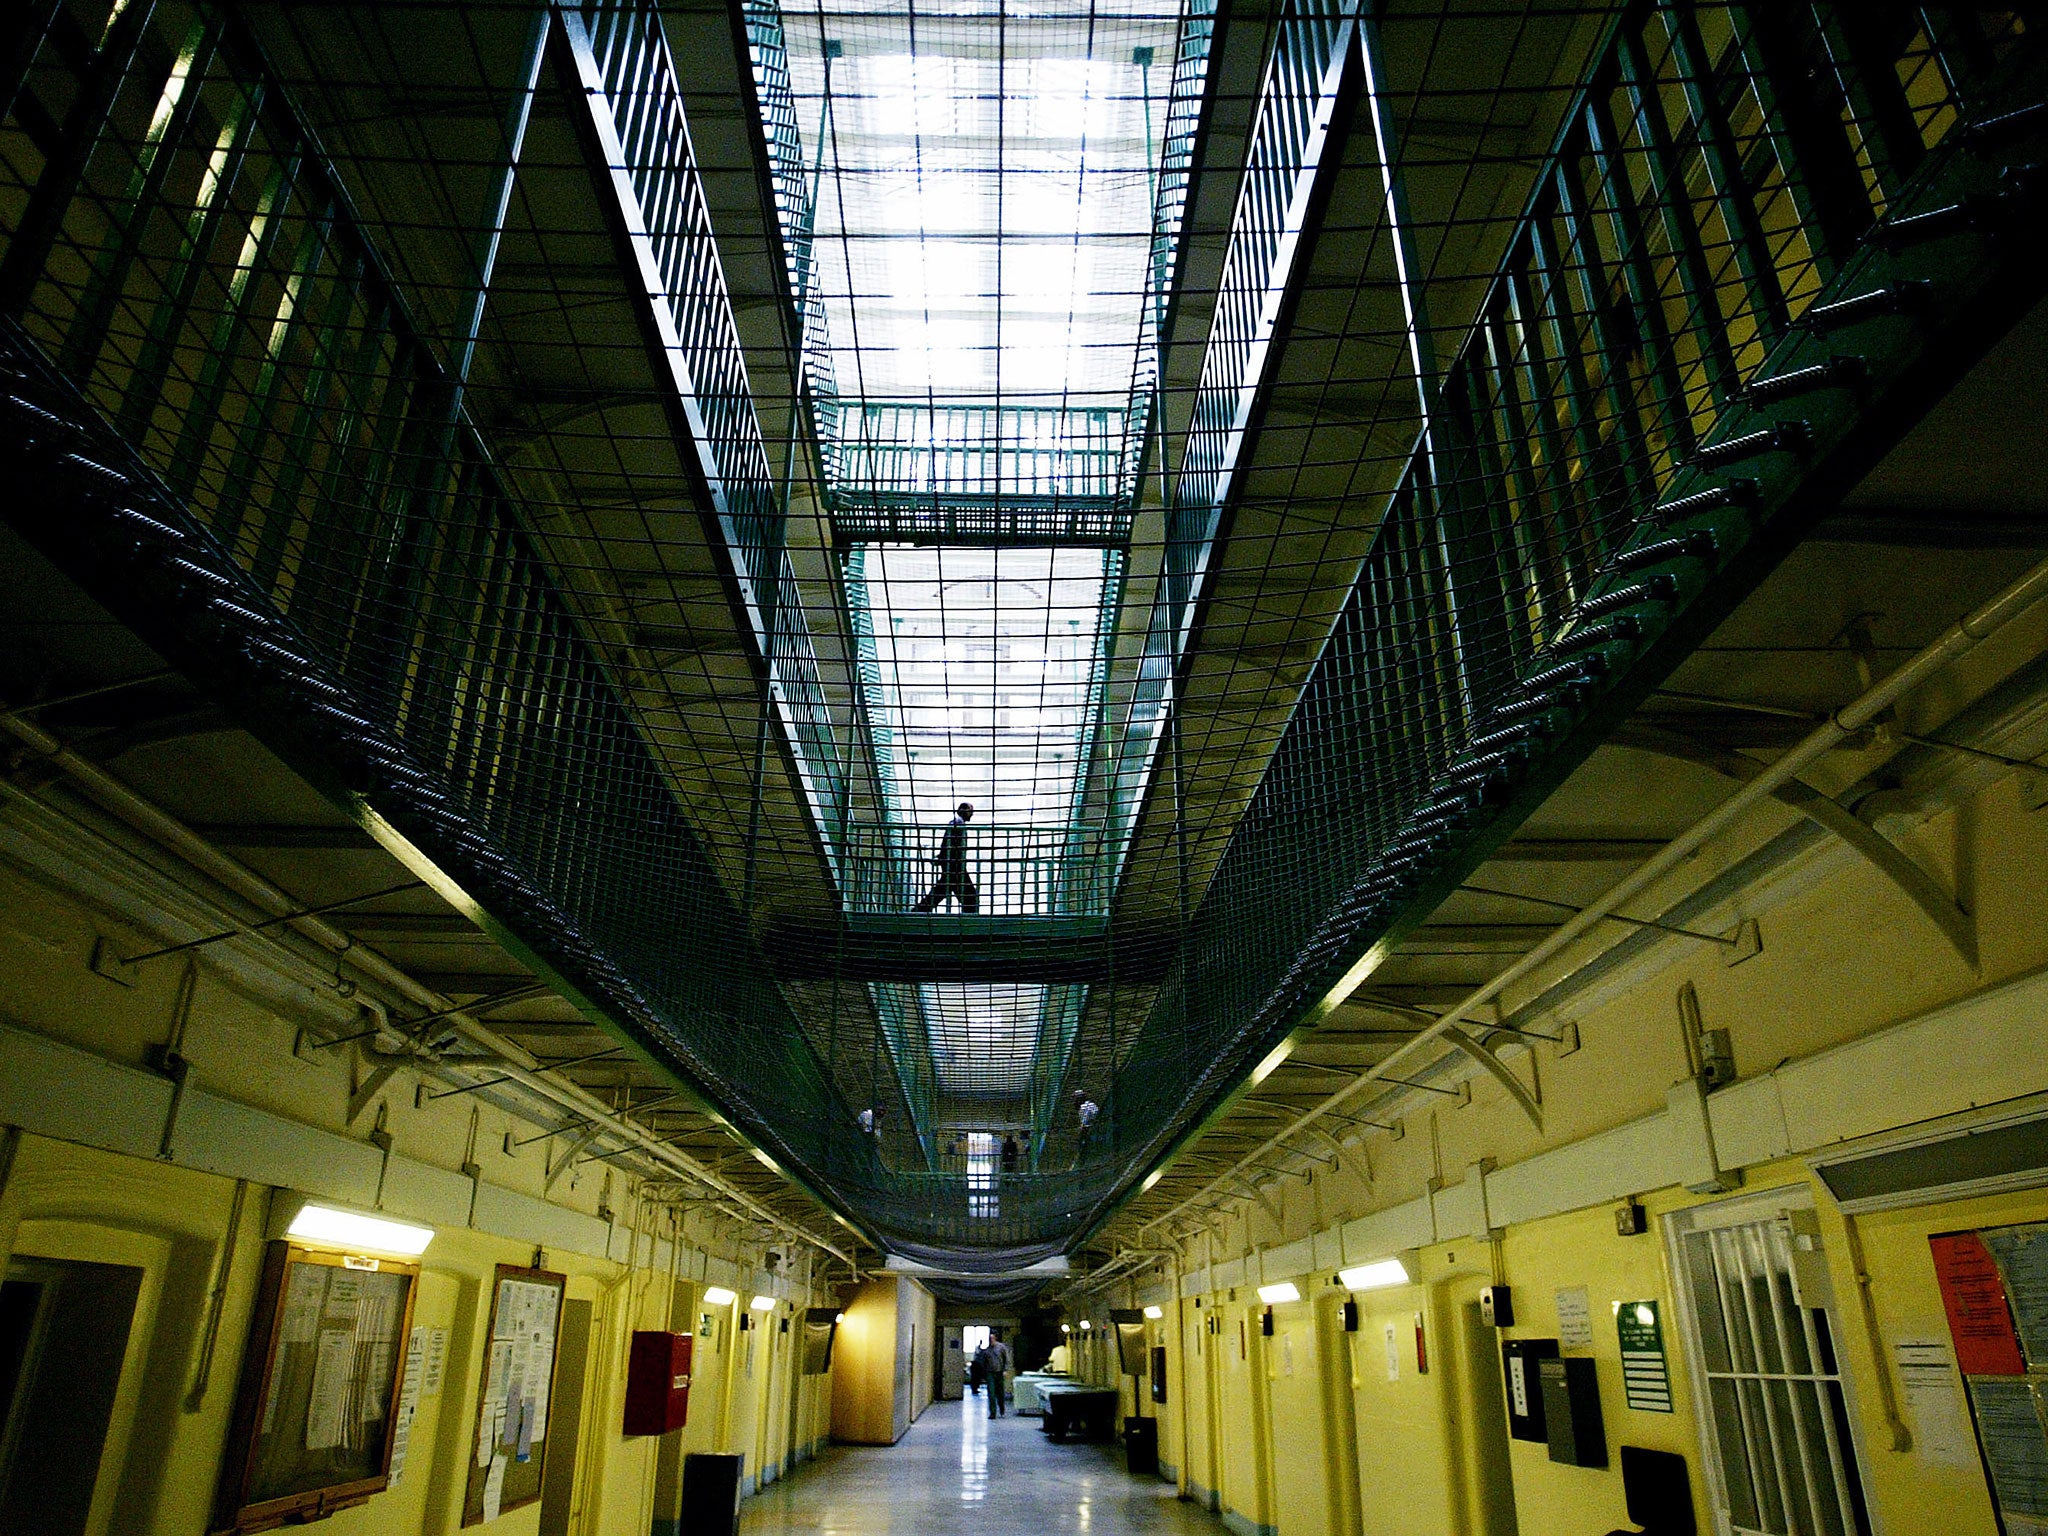 80 per cent of women prisoners have not committed a violent crime